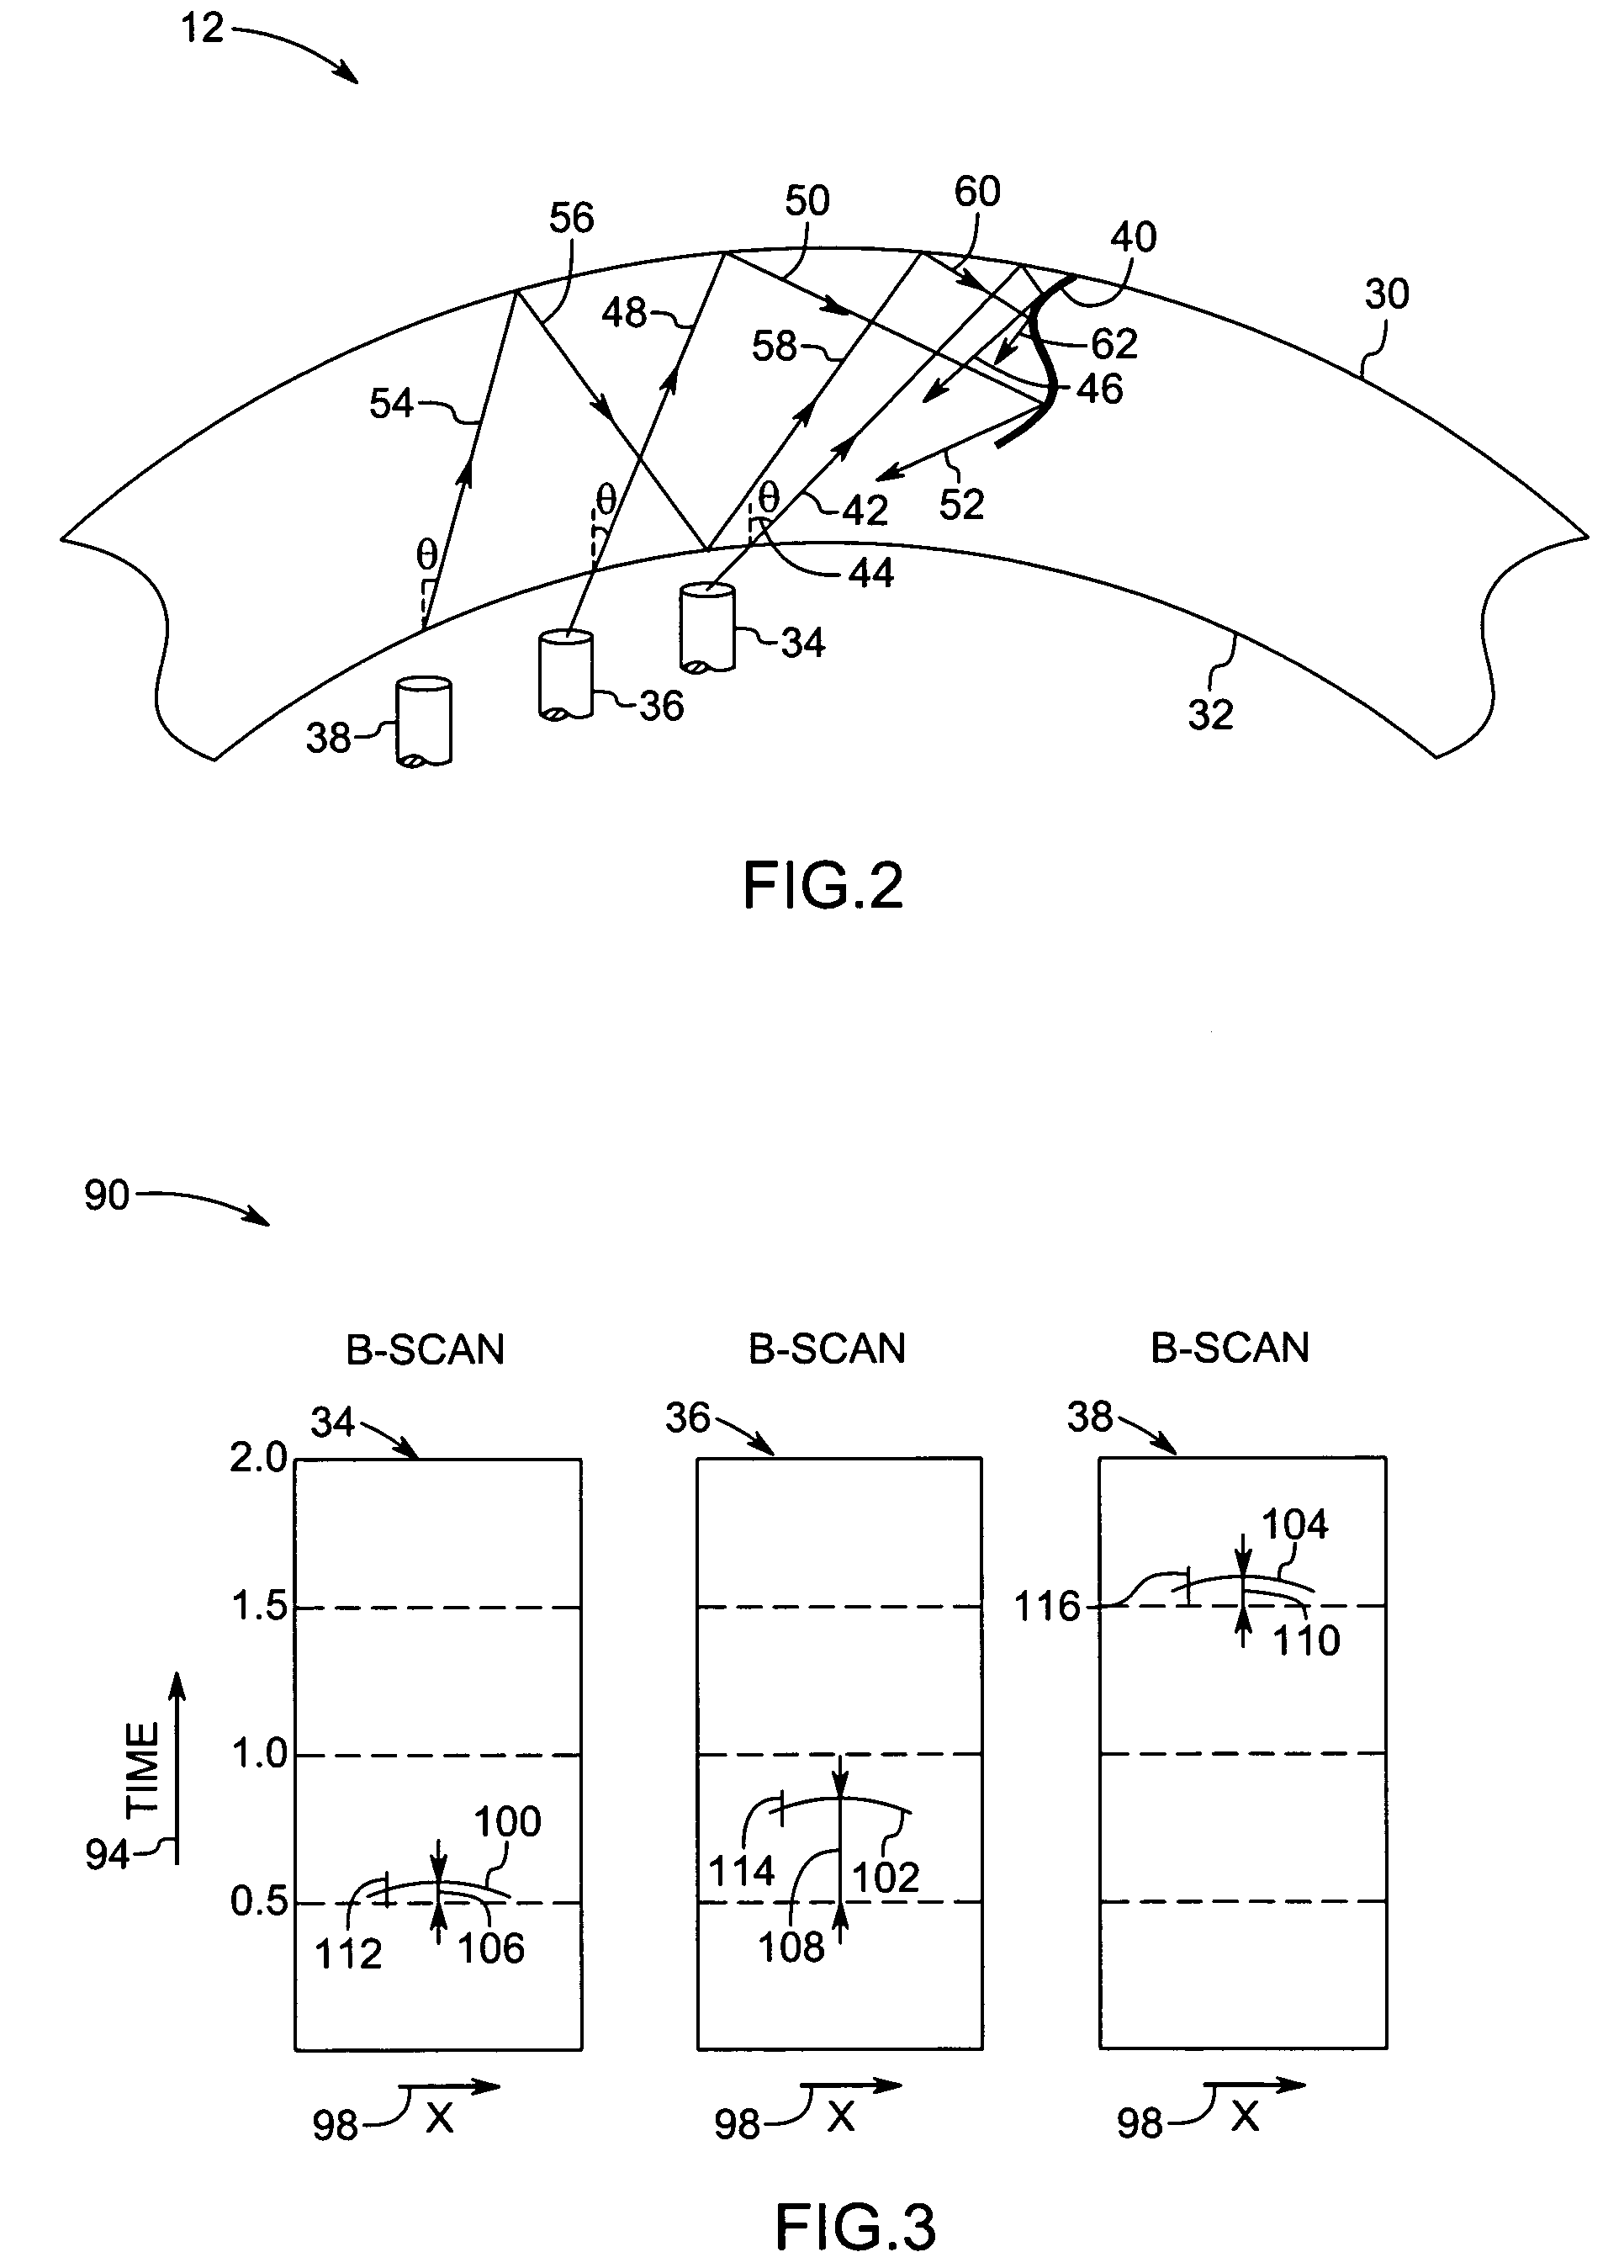 Method and system for inspecting objects using ultrasound scan data